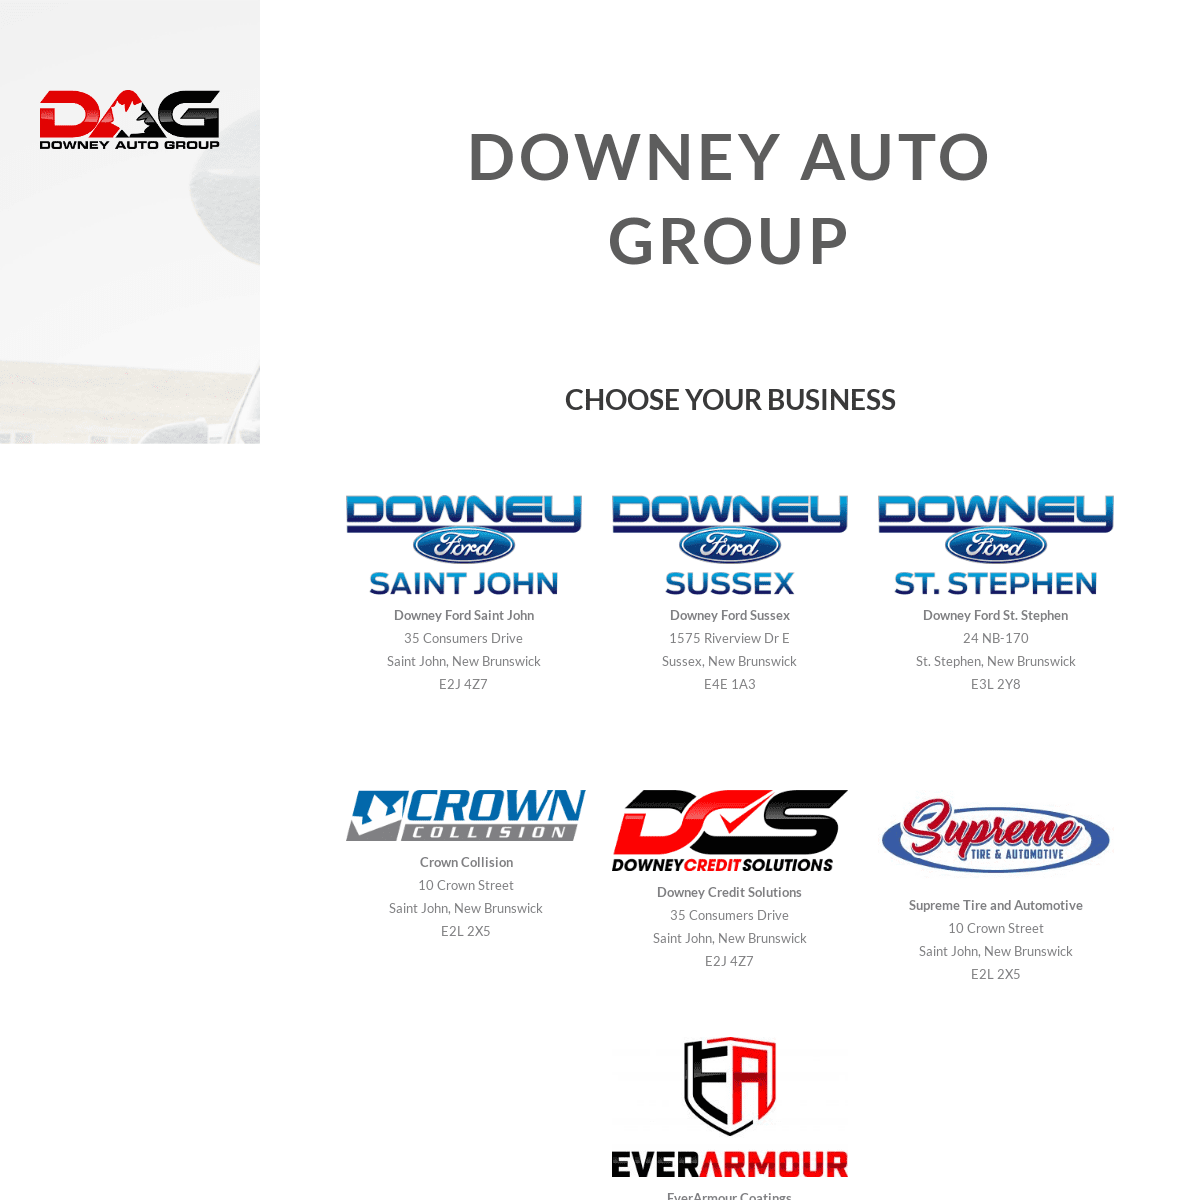 A complete backup of downeyautogroup.ca